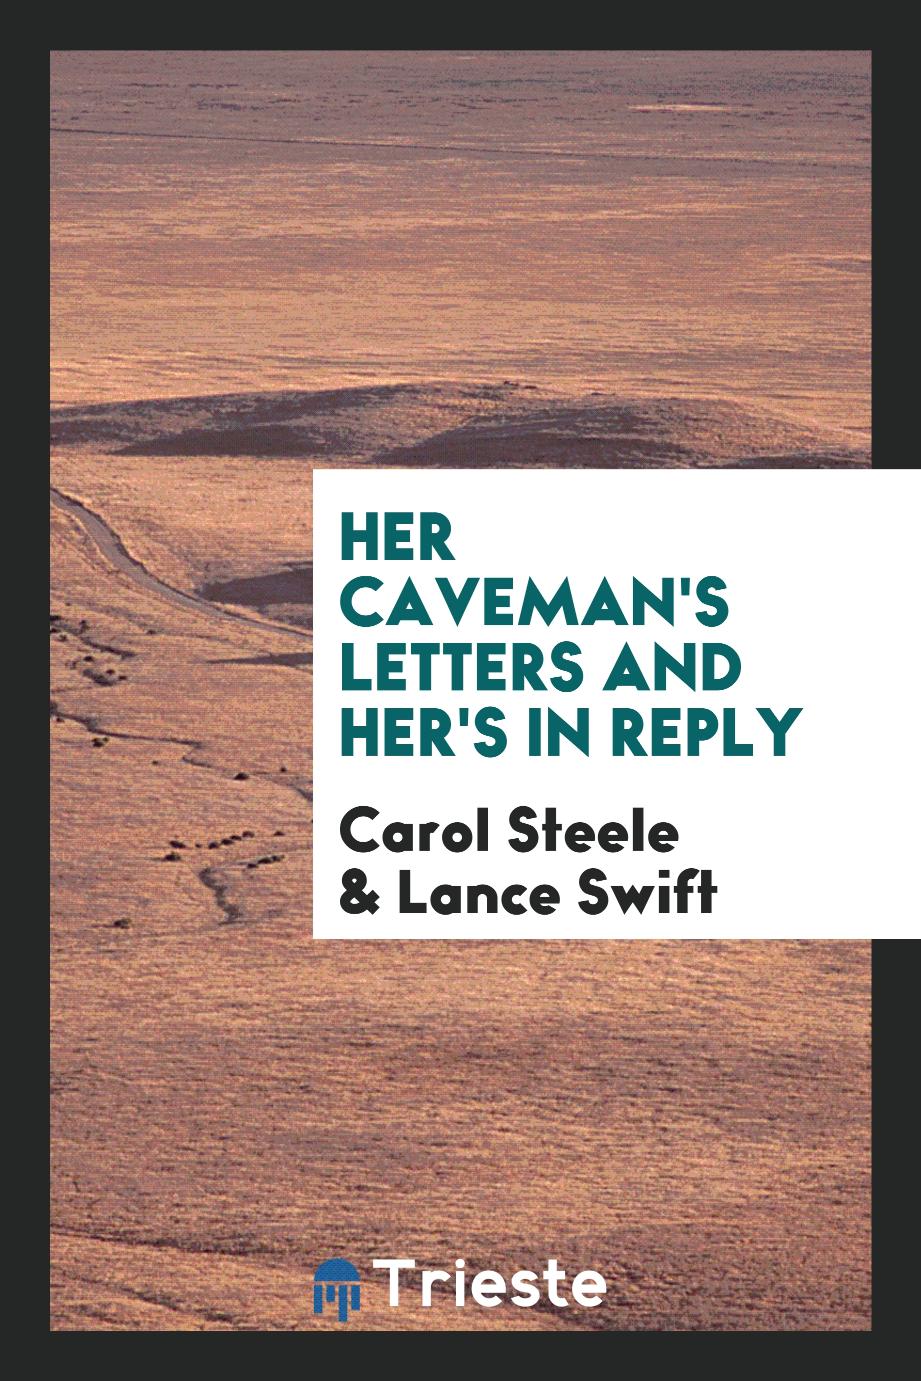 Her Caveman's Letters and Her's in Reply